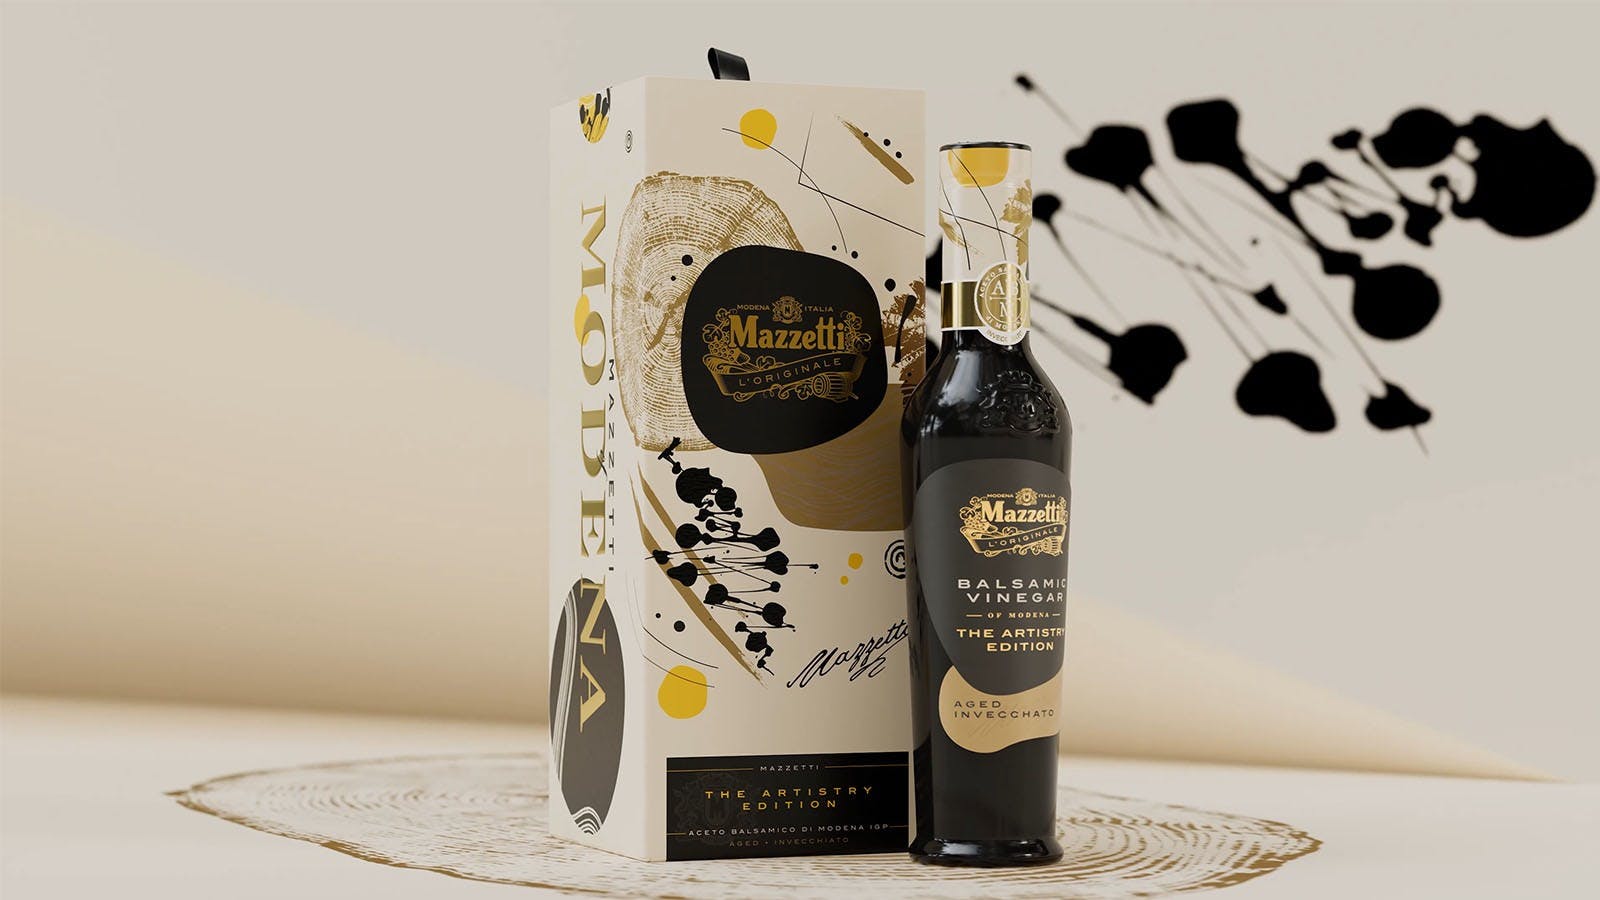 Mazzetti artistry edition pack and bottle